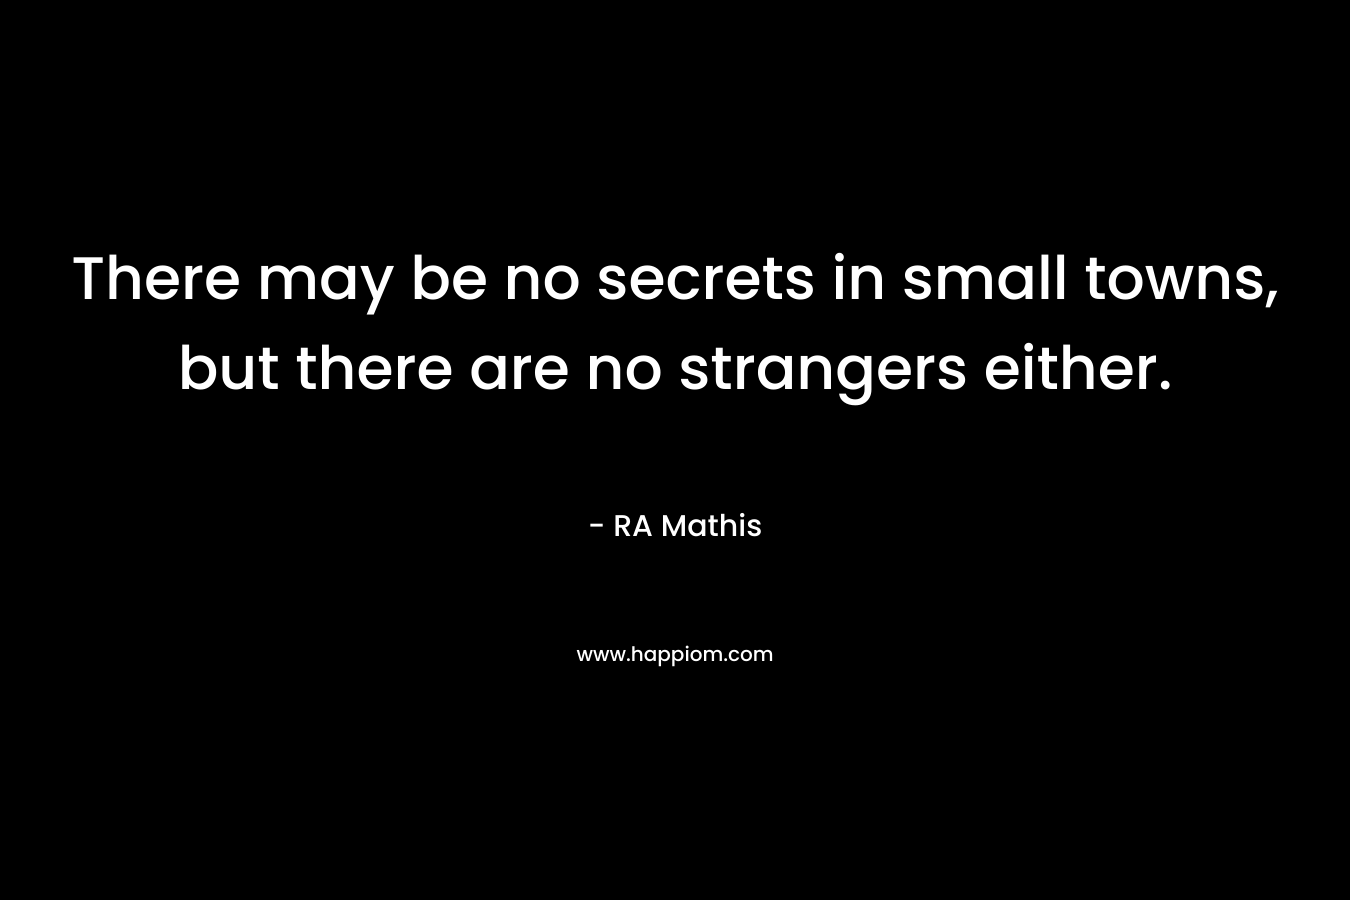 There may be no secrets in small towns, but there are no strangers either. – RA Mathis